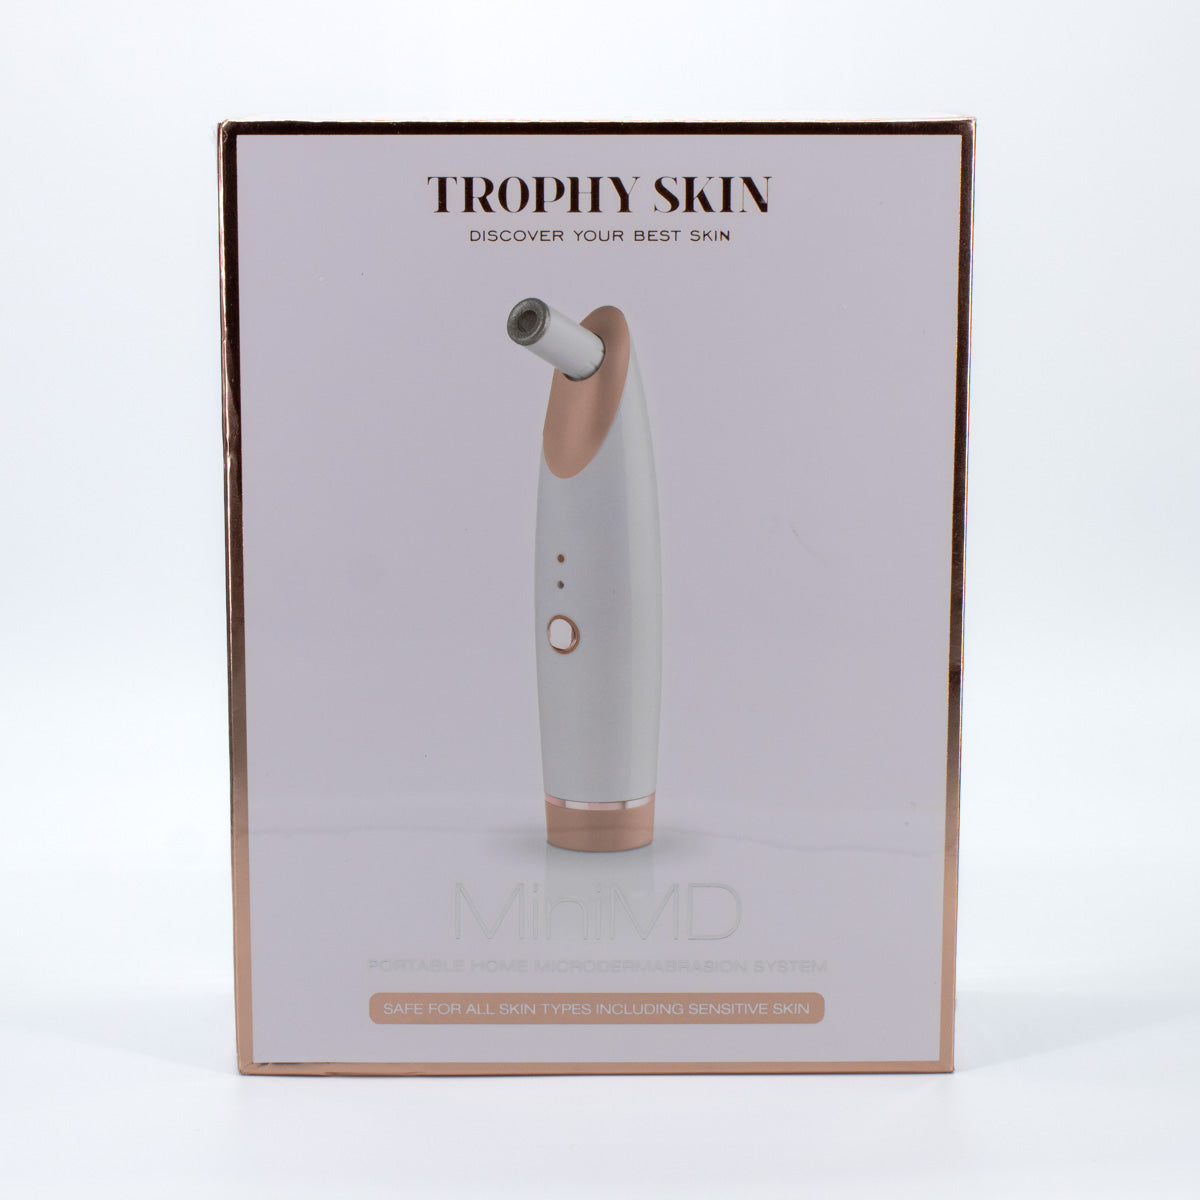 TROPHY SKIN MiniMD Handheld Portable Microdermabrasion Device - Imperfect  Box